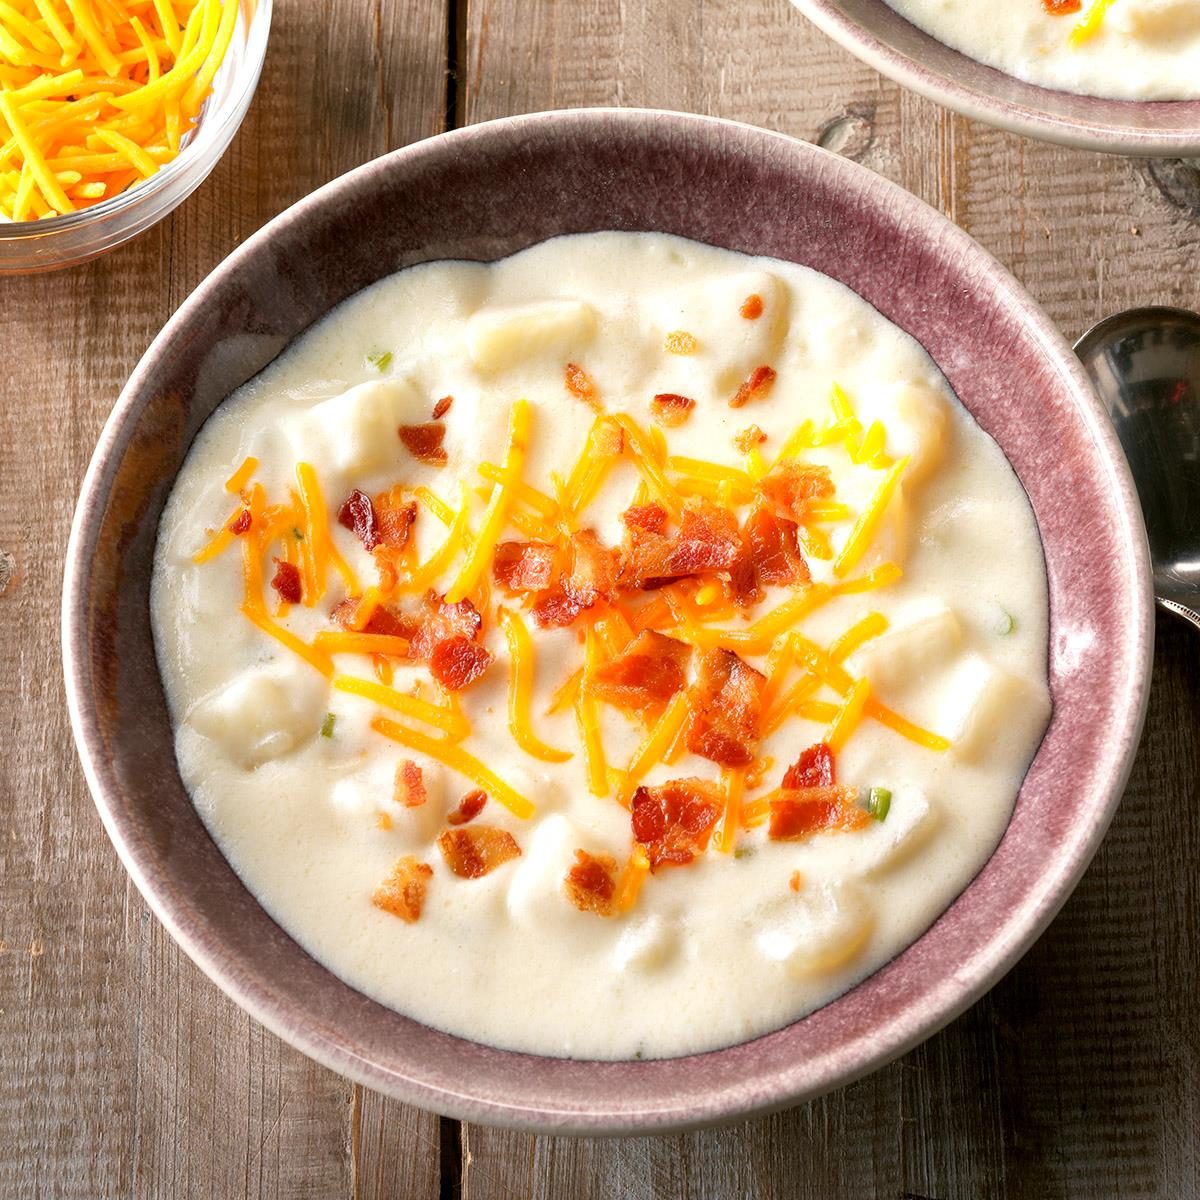 Inspired by: Our Own Baked Potato Soup